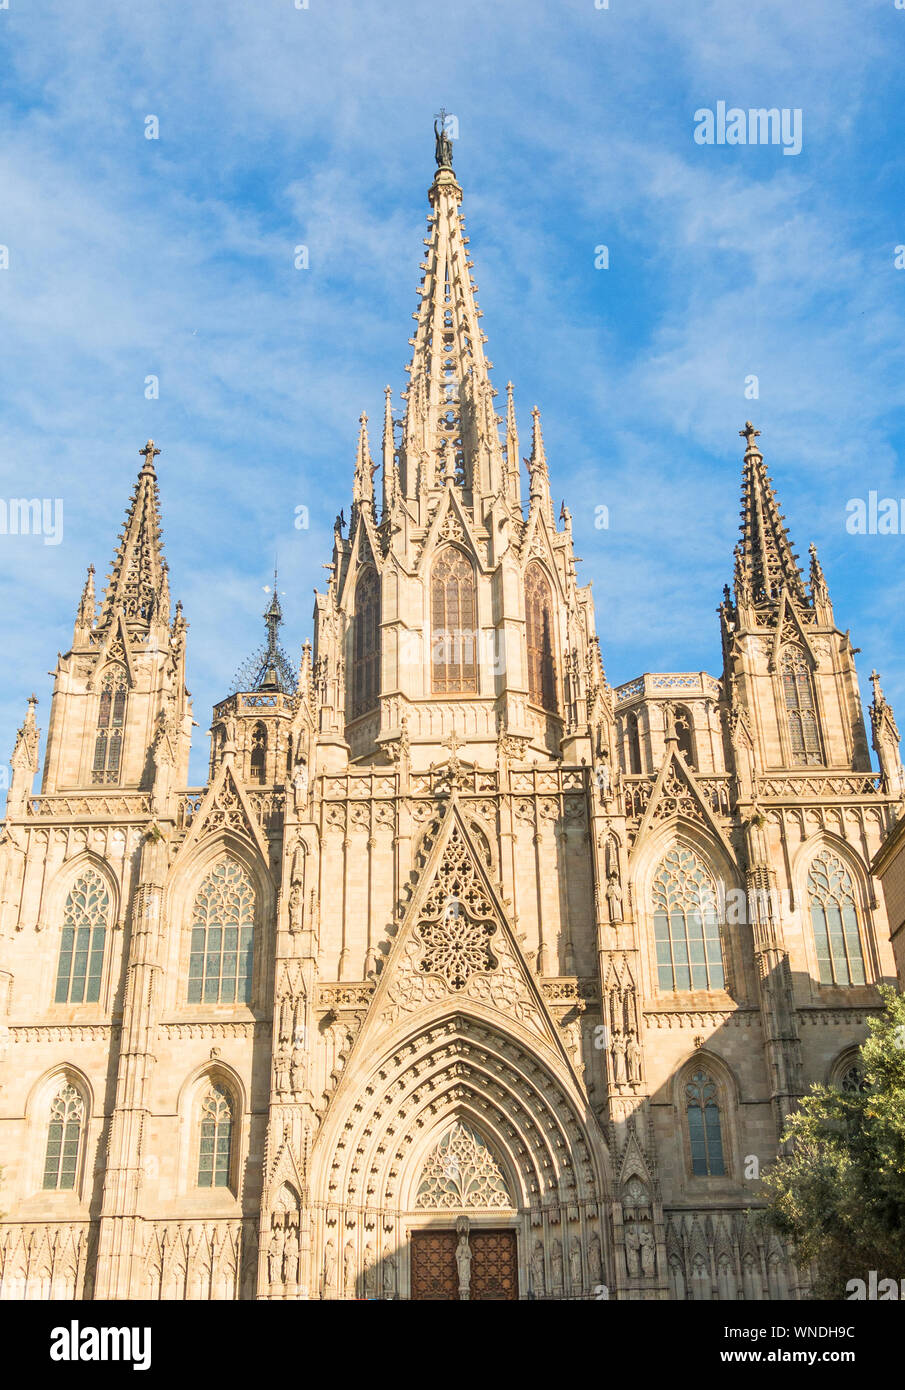 Facade of the Metropolitan Cathedral Basilica of Barcelona (also known as The Cathedral of the Holy Cross and Saint Eulalia) located in the gothic qua Stock Photo